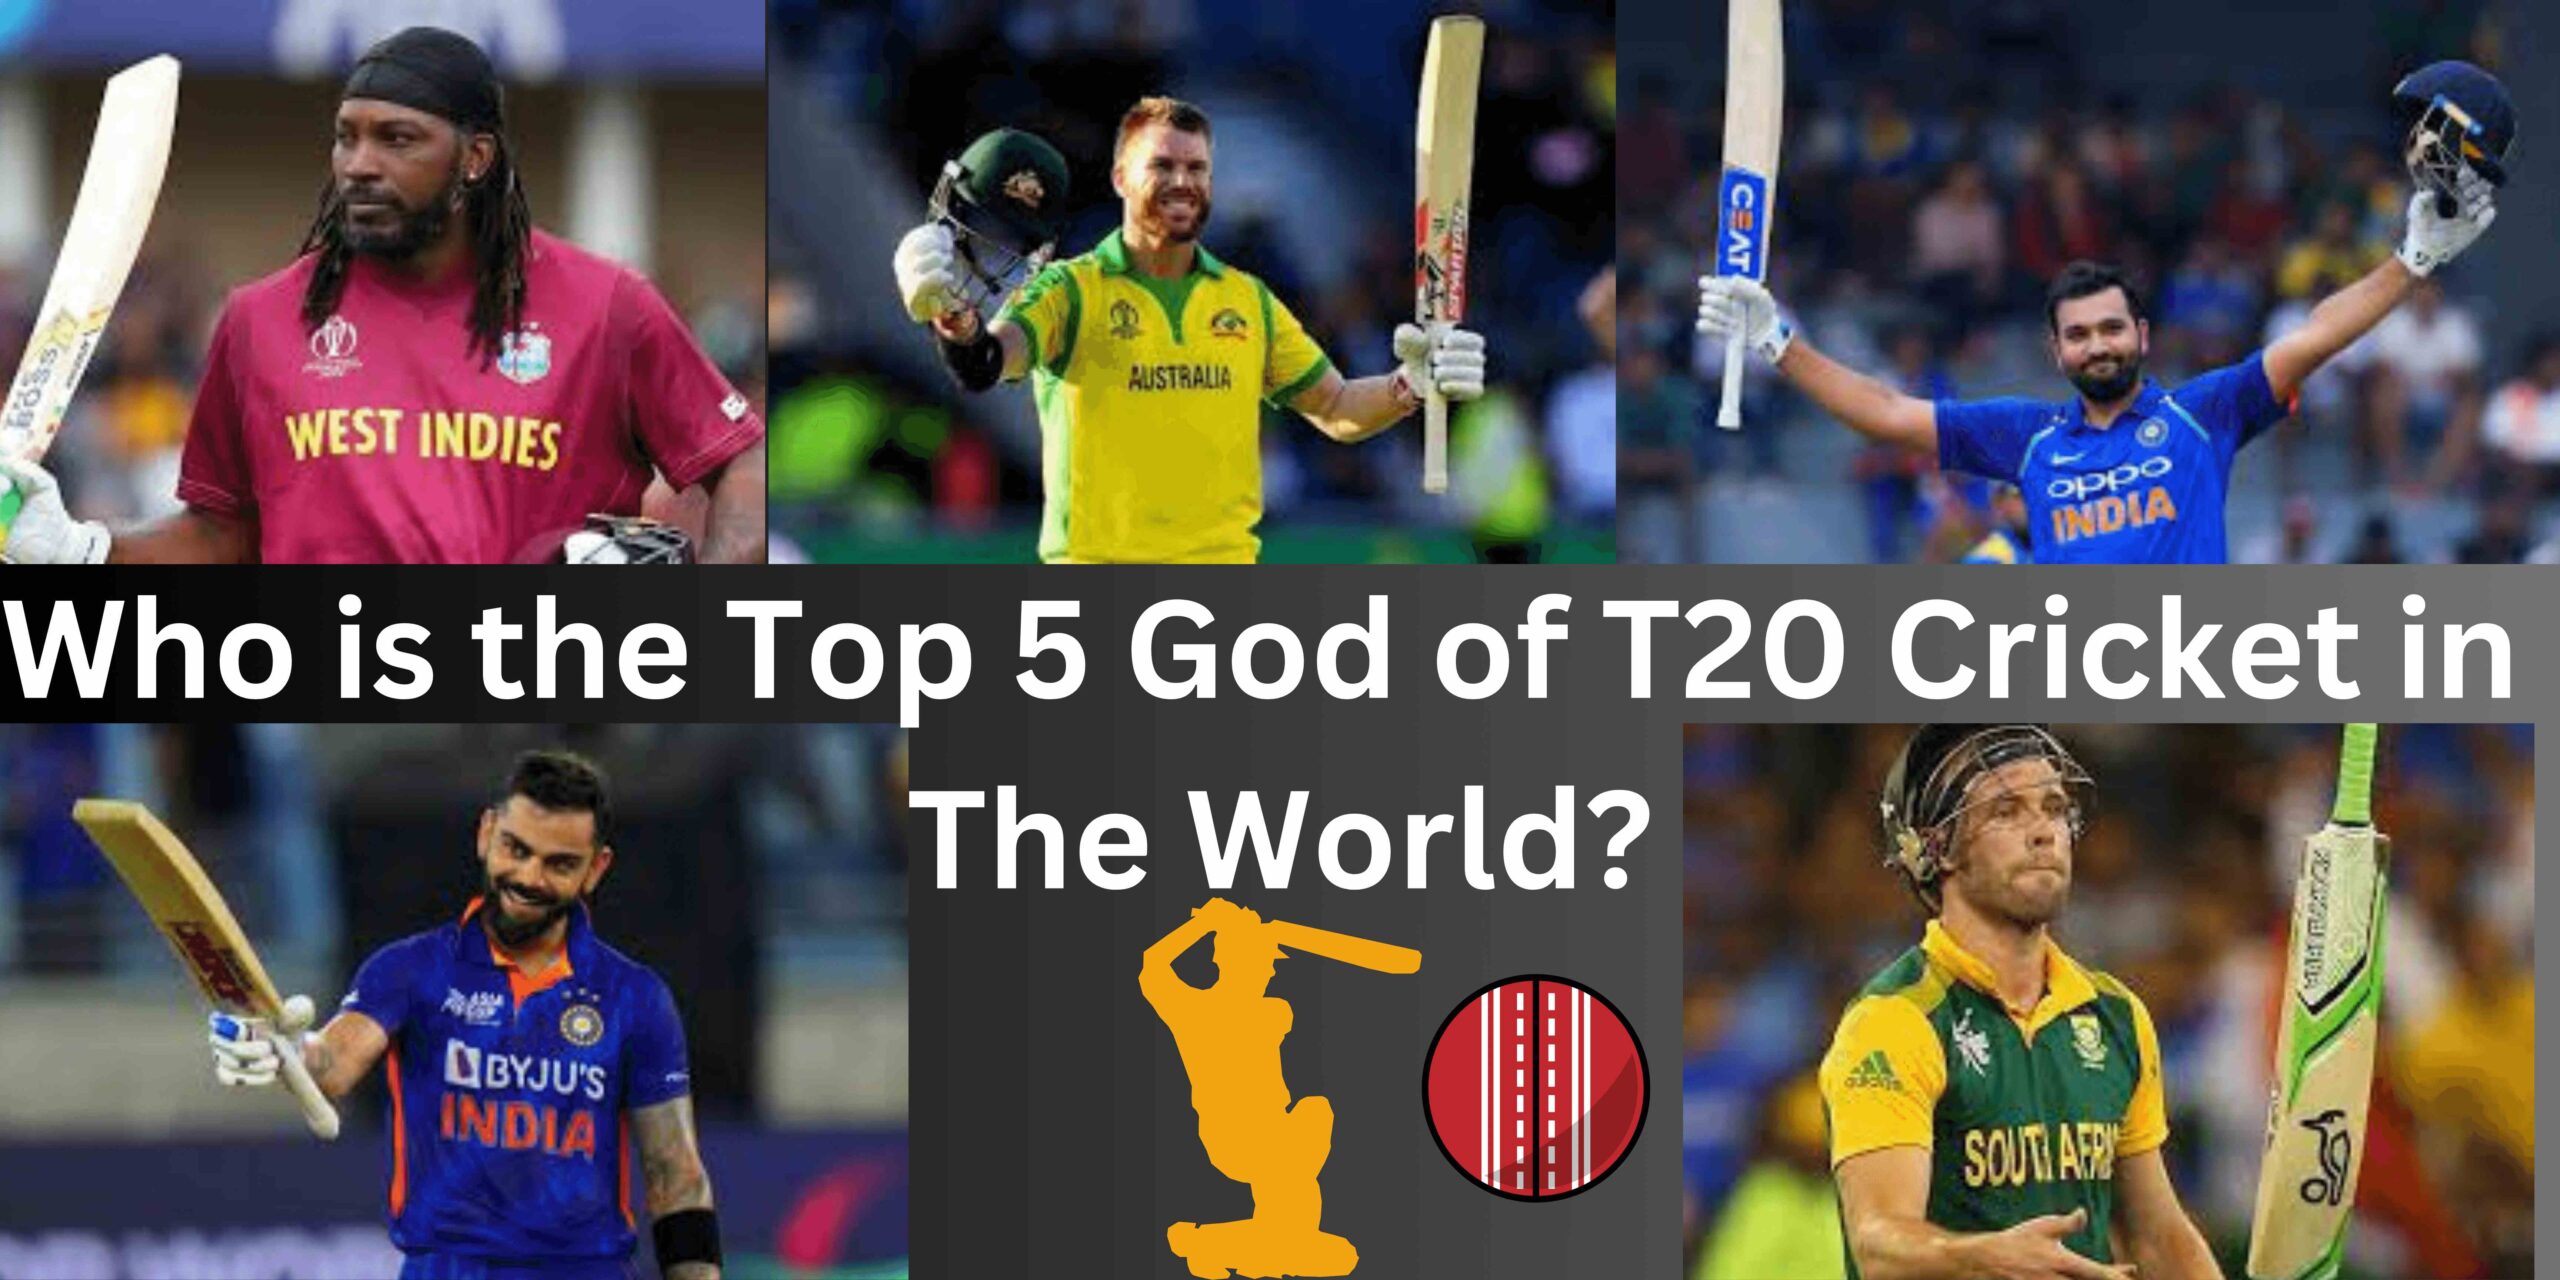 Who is the Top 5 God of T20 Cricket in the World?